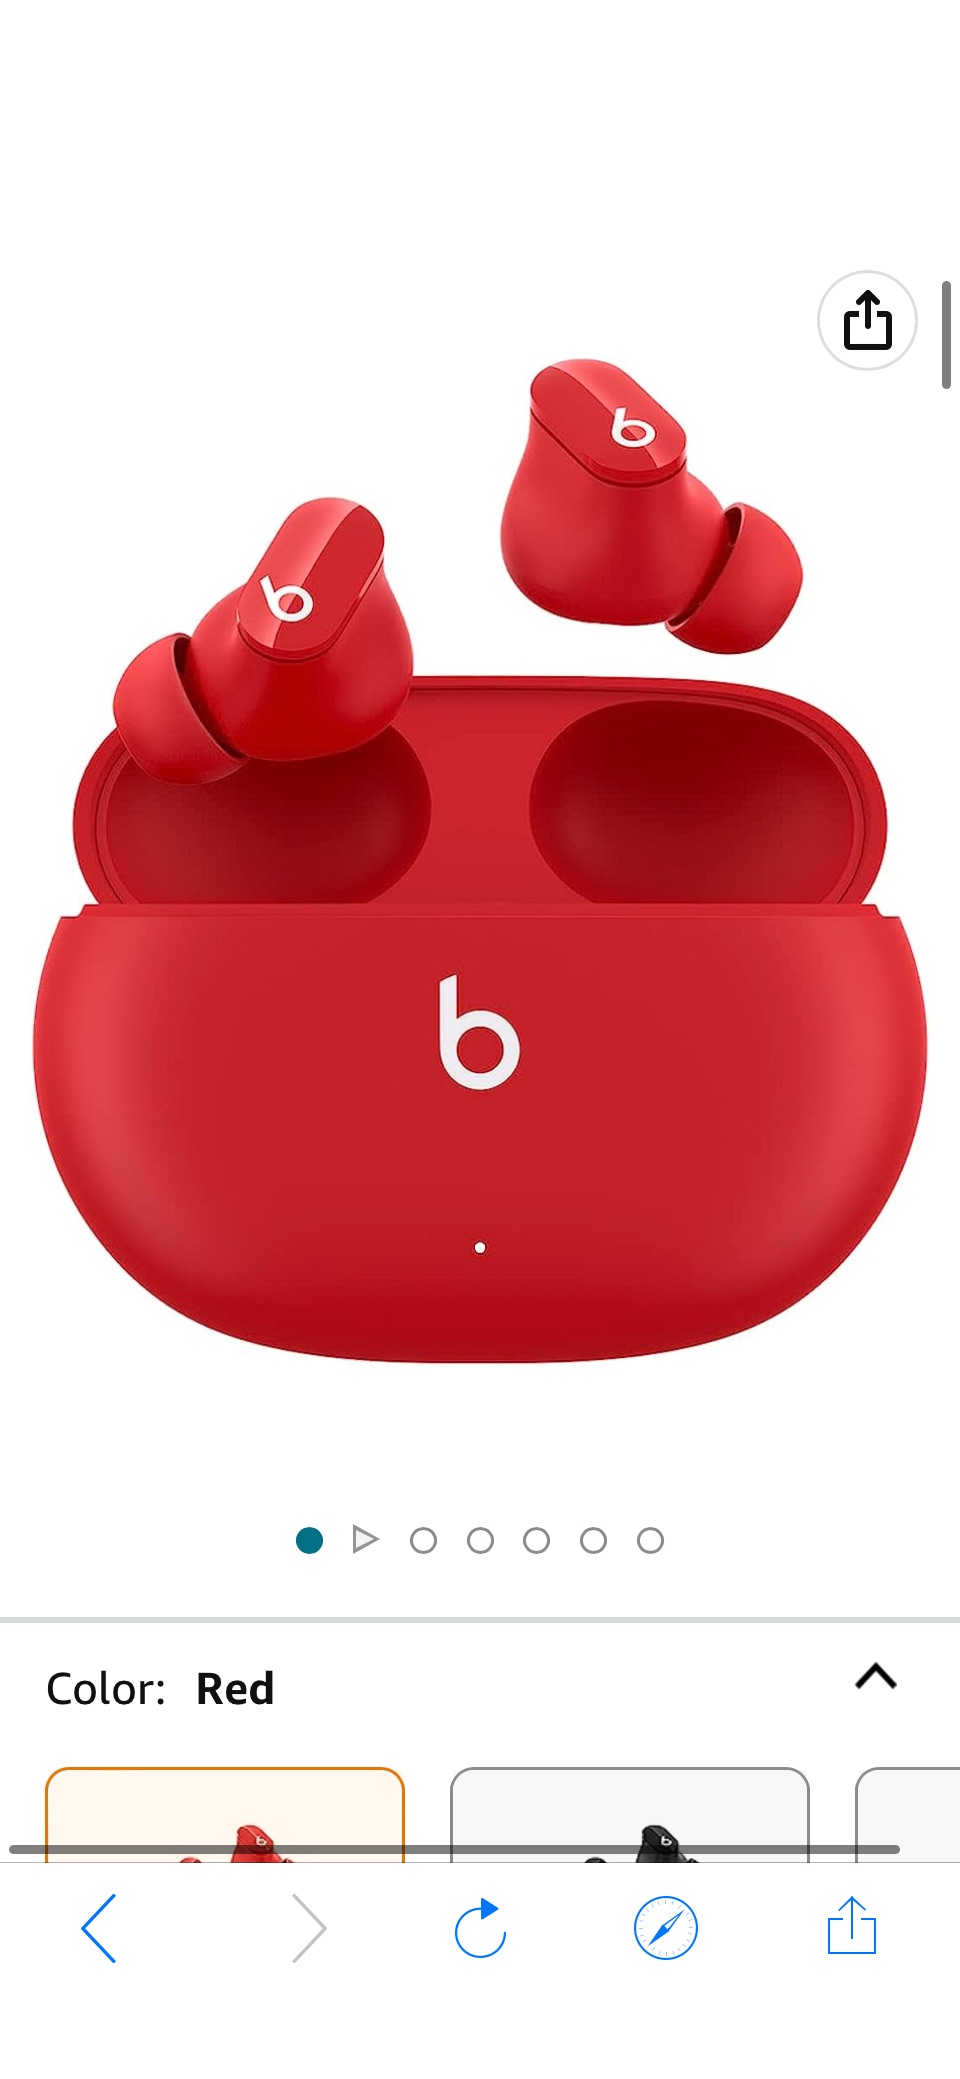 Amazon.com: Beats Studio Buds – True Wireless Noise Cancelling Earbuds – Compatible with Apple & Android, Built-in Microphone, IPX4 Rating, Sweat Resistant Earphones, Class 1 Bluetooth Headphones - Red : Electronics原价149.95